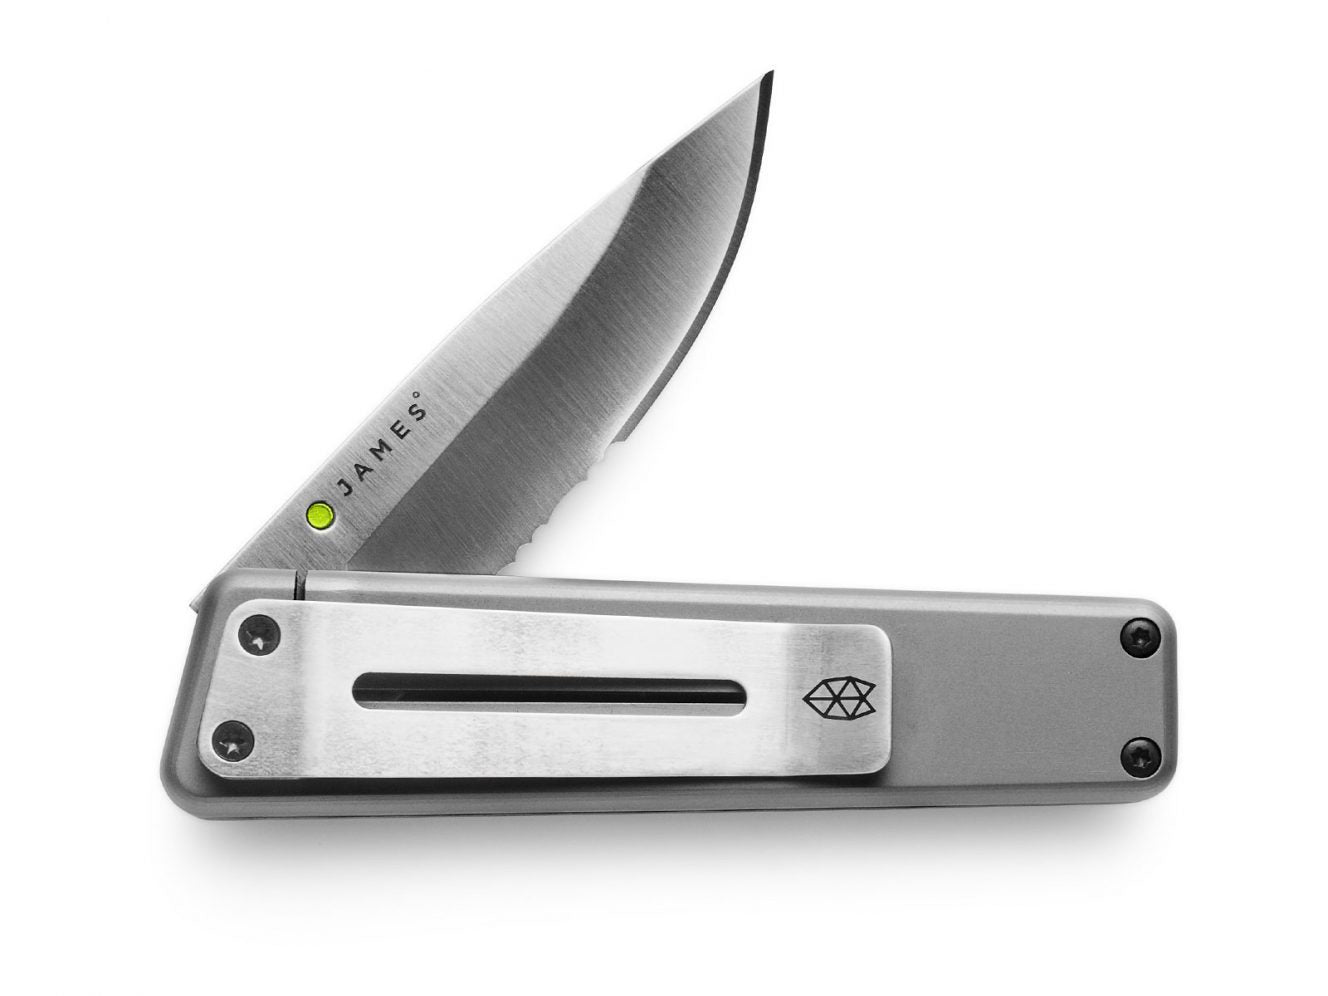 The Chapter knife with titanium handle and stainless, serrated steel blade.